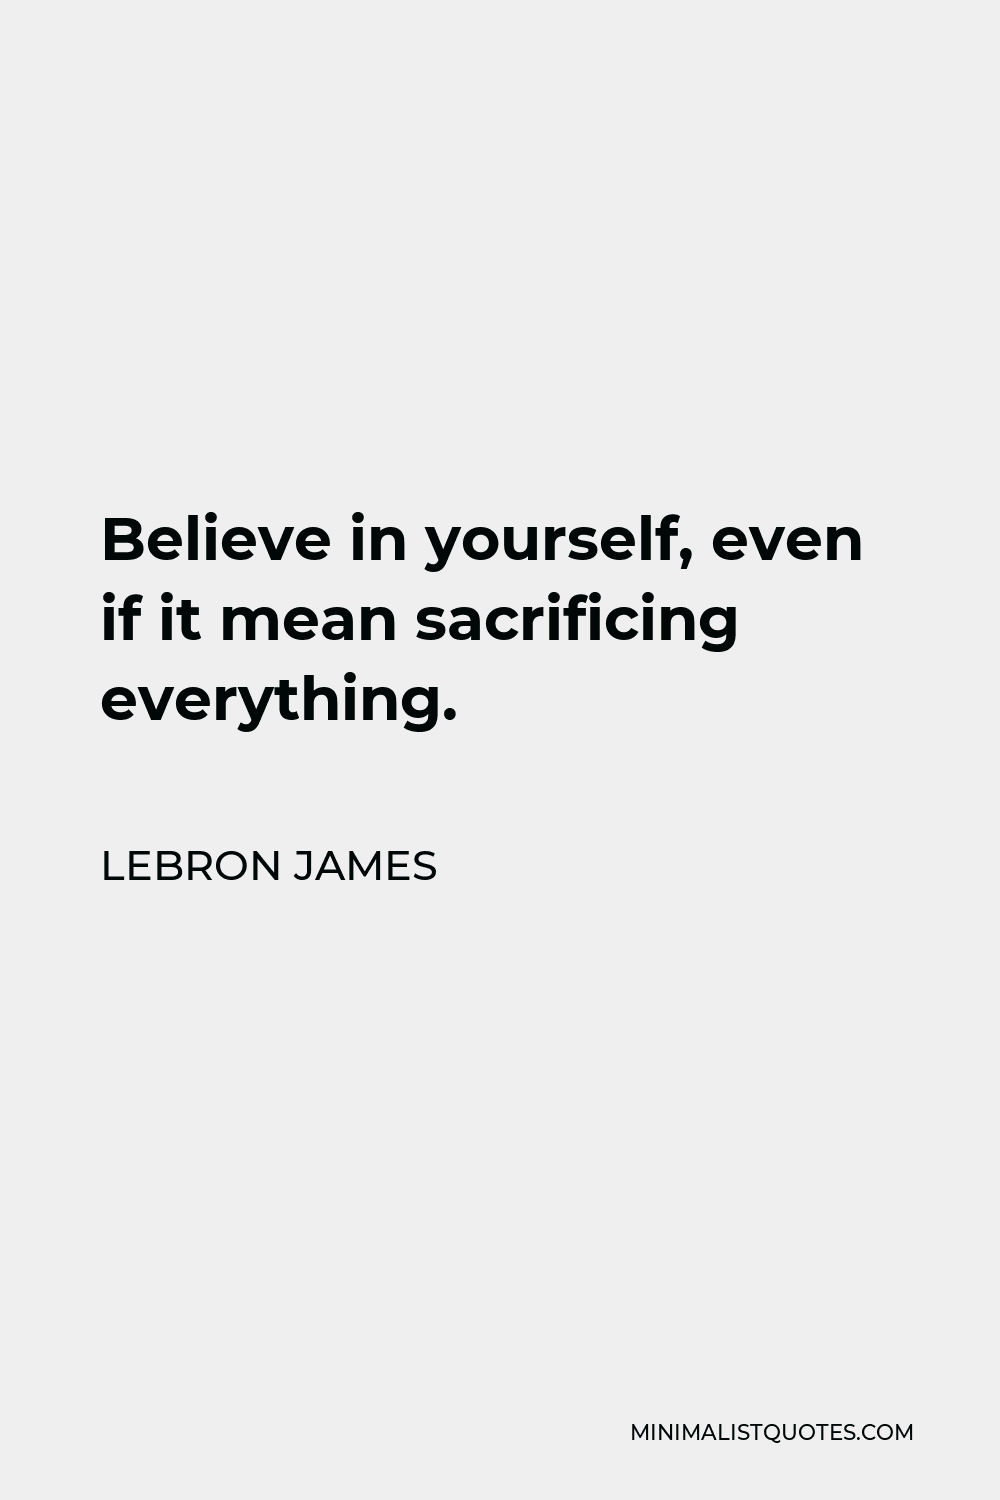 LeBron James Quote - Believe in yourself, even if it mean sacrificing everything.